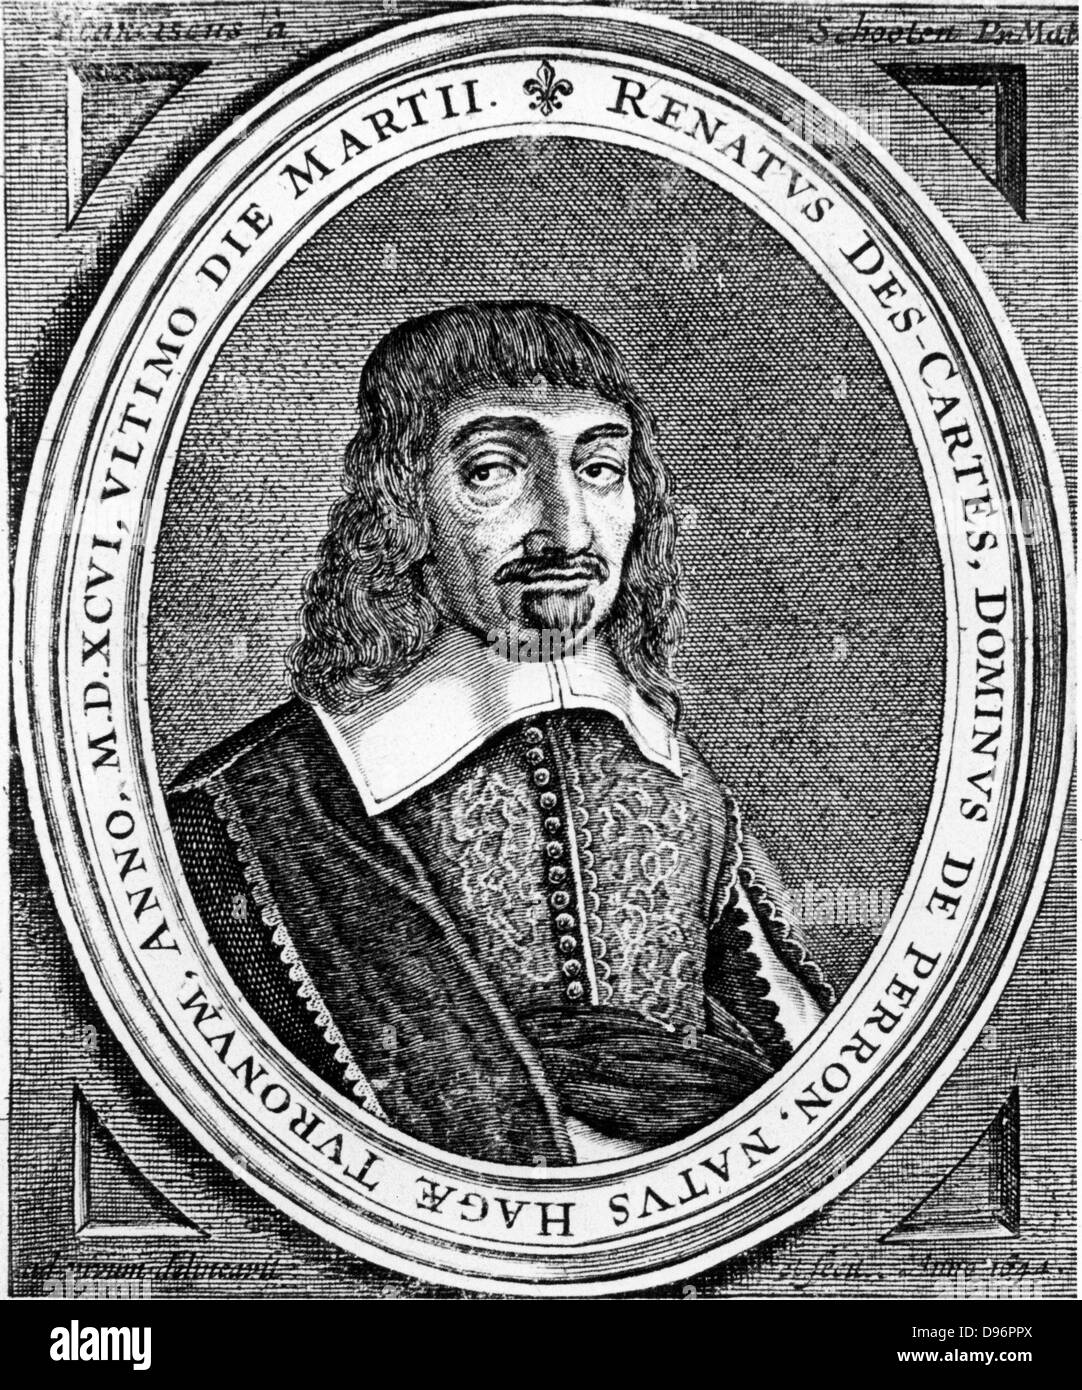 Rene Descartes (1596-1650) French philosopher and mathematician.  From an edition of his 'Principia Philosophica'. (Amsterdam, 1672). Engraving. Stock Photo